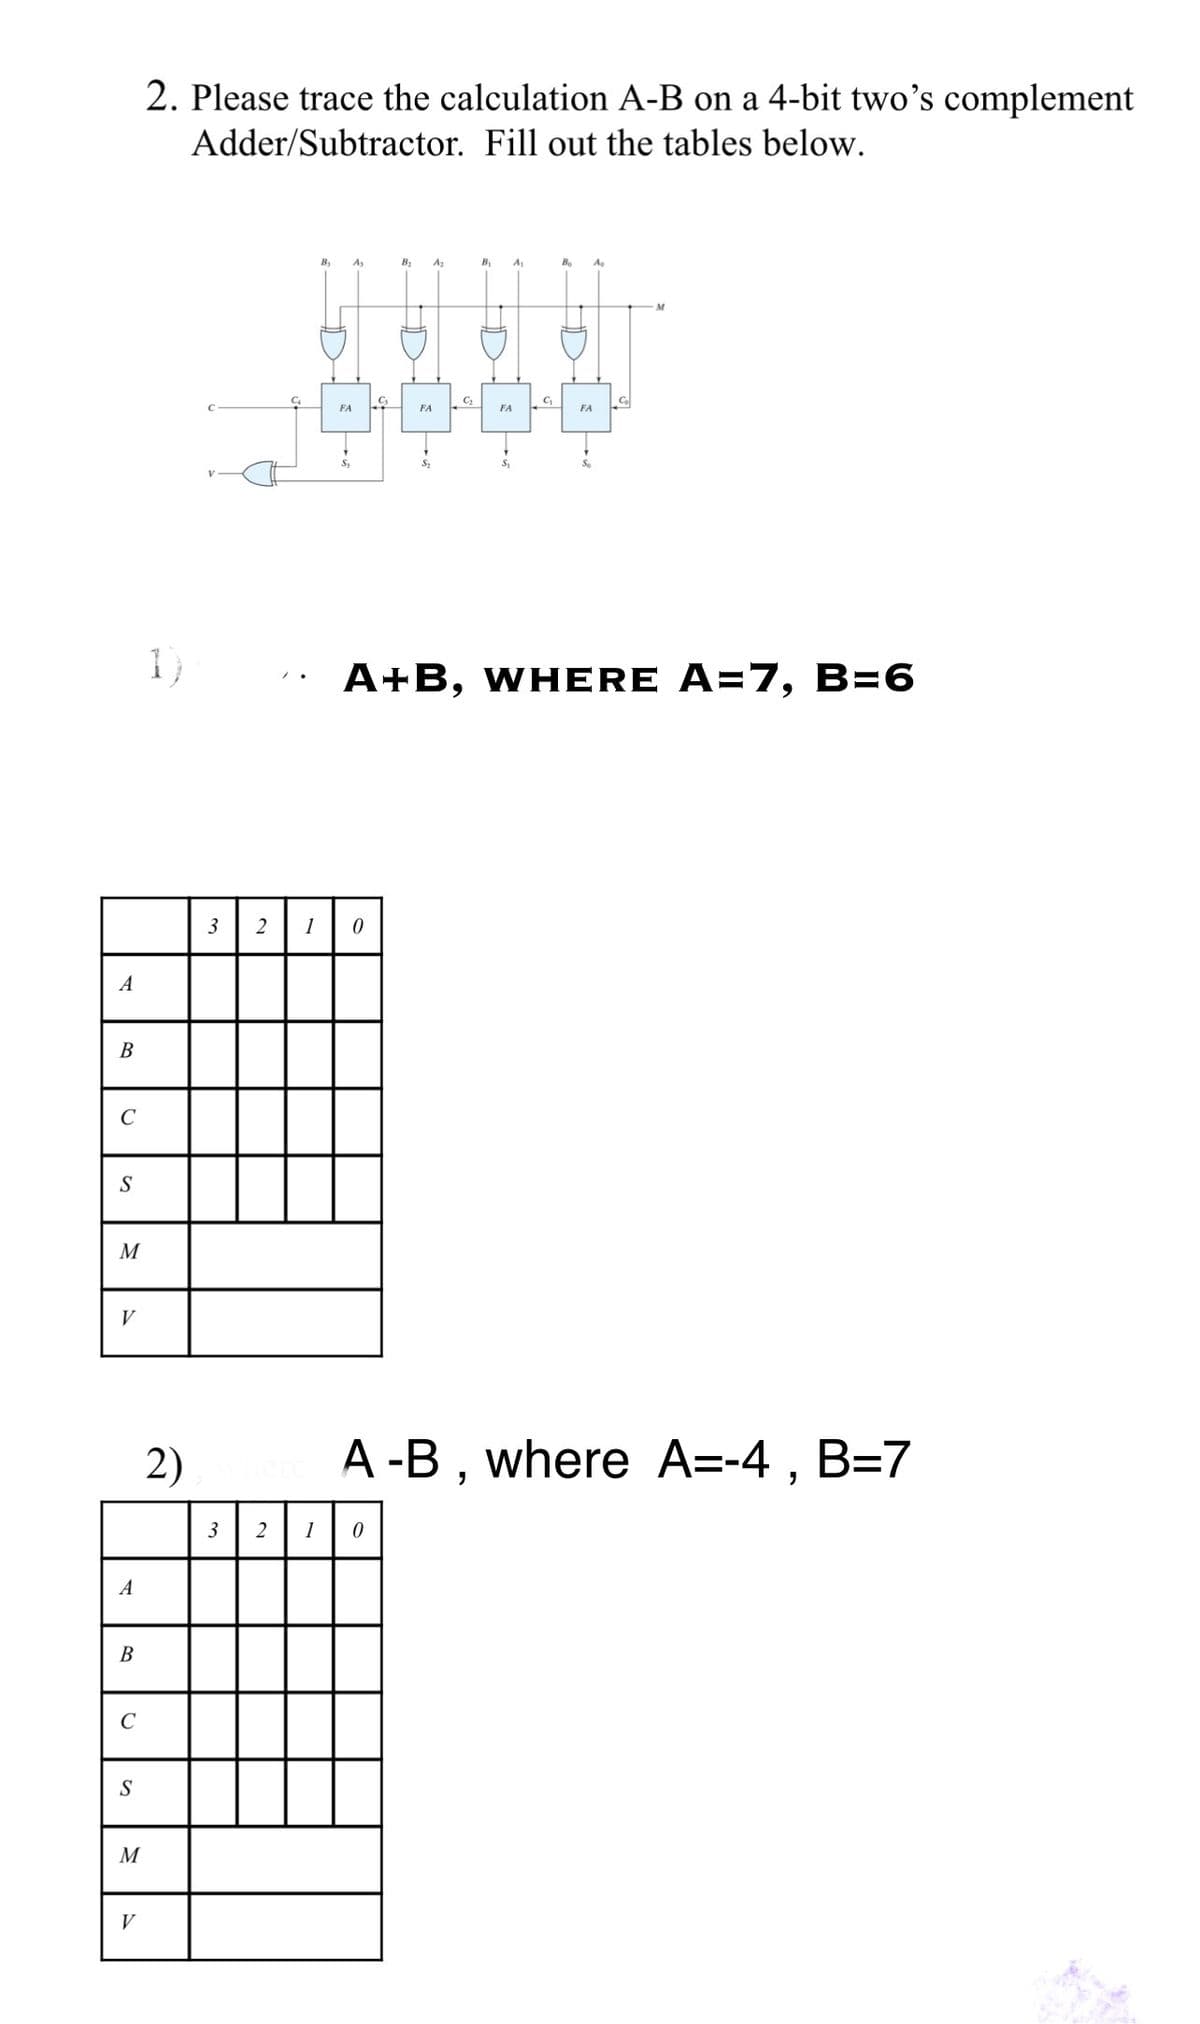 A
B
C
S
M
V
A
B
S
M
V
2. Please trace the calculation A-B on a 4-bit two's complement
Adder/Subtractor. Fill out the tables below.
1)
2)
By
A₁
B₂
A₂
By A₁
Bo
C
C
C₁
C
FA
FA
FA
FA
3 2 1
3 2
S₁
S₂
S₁
So
A+B, WHERE A=7, B=6
0
A-B, where A=-4, B=7
1
0